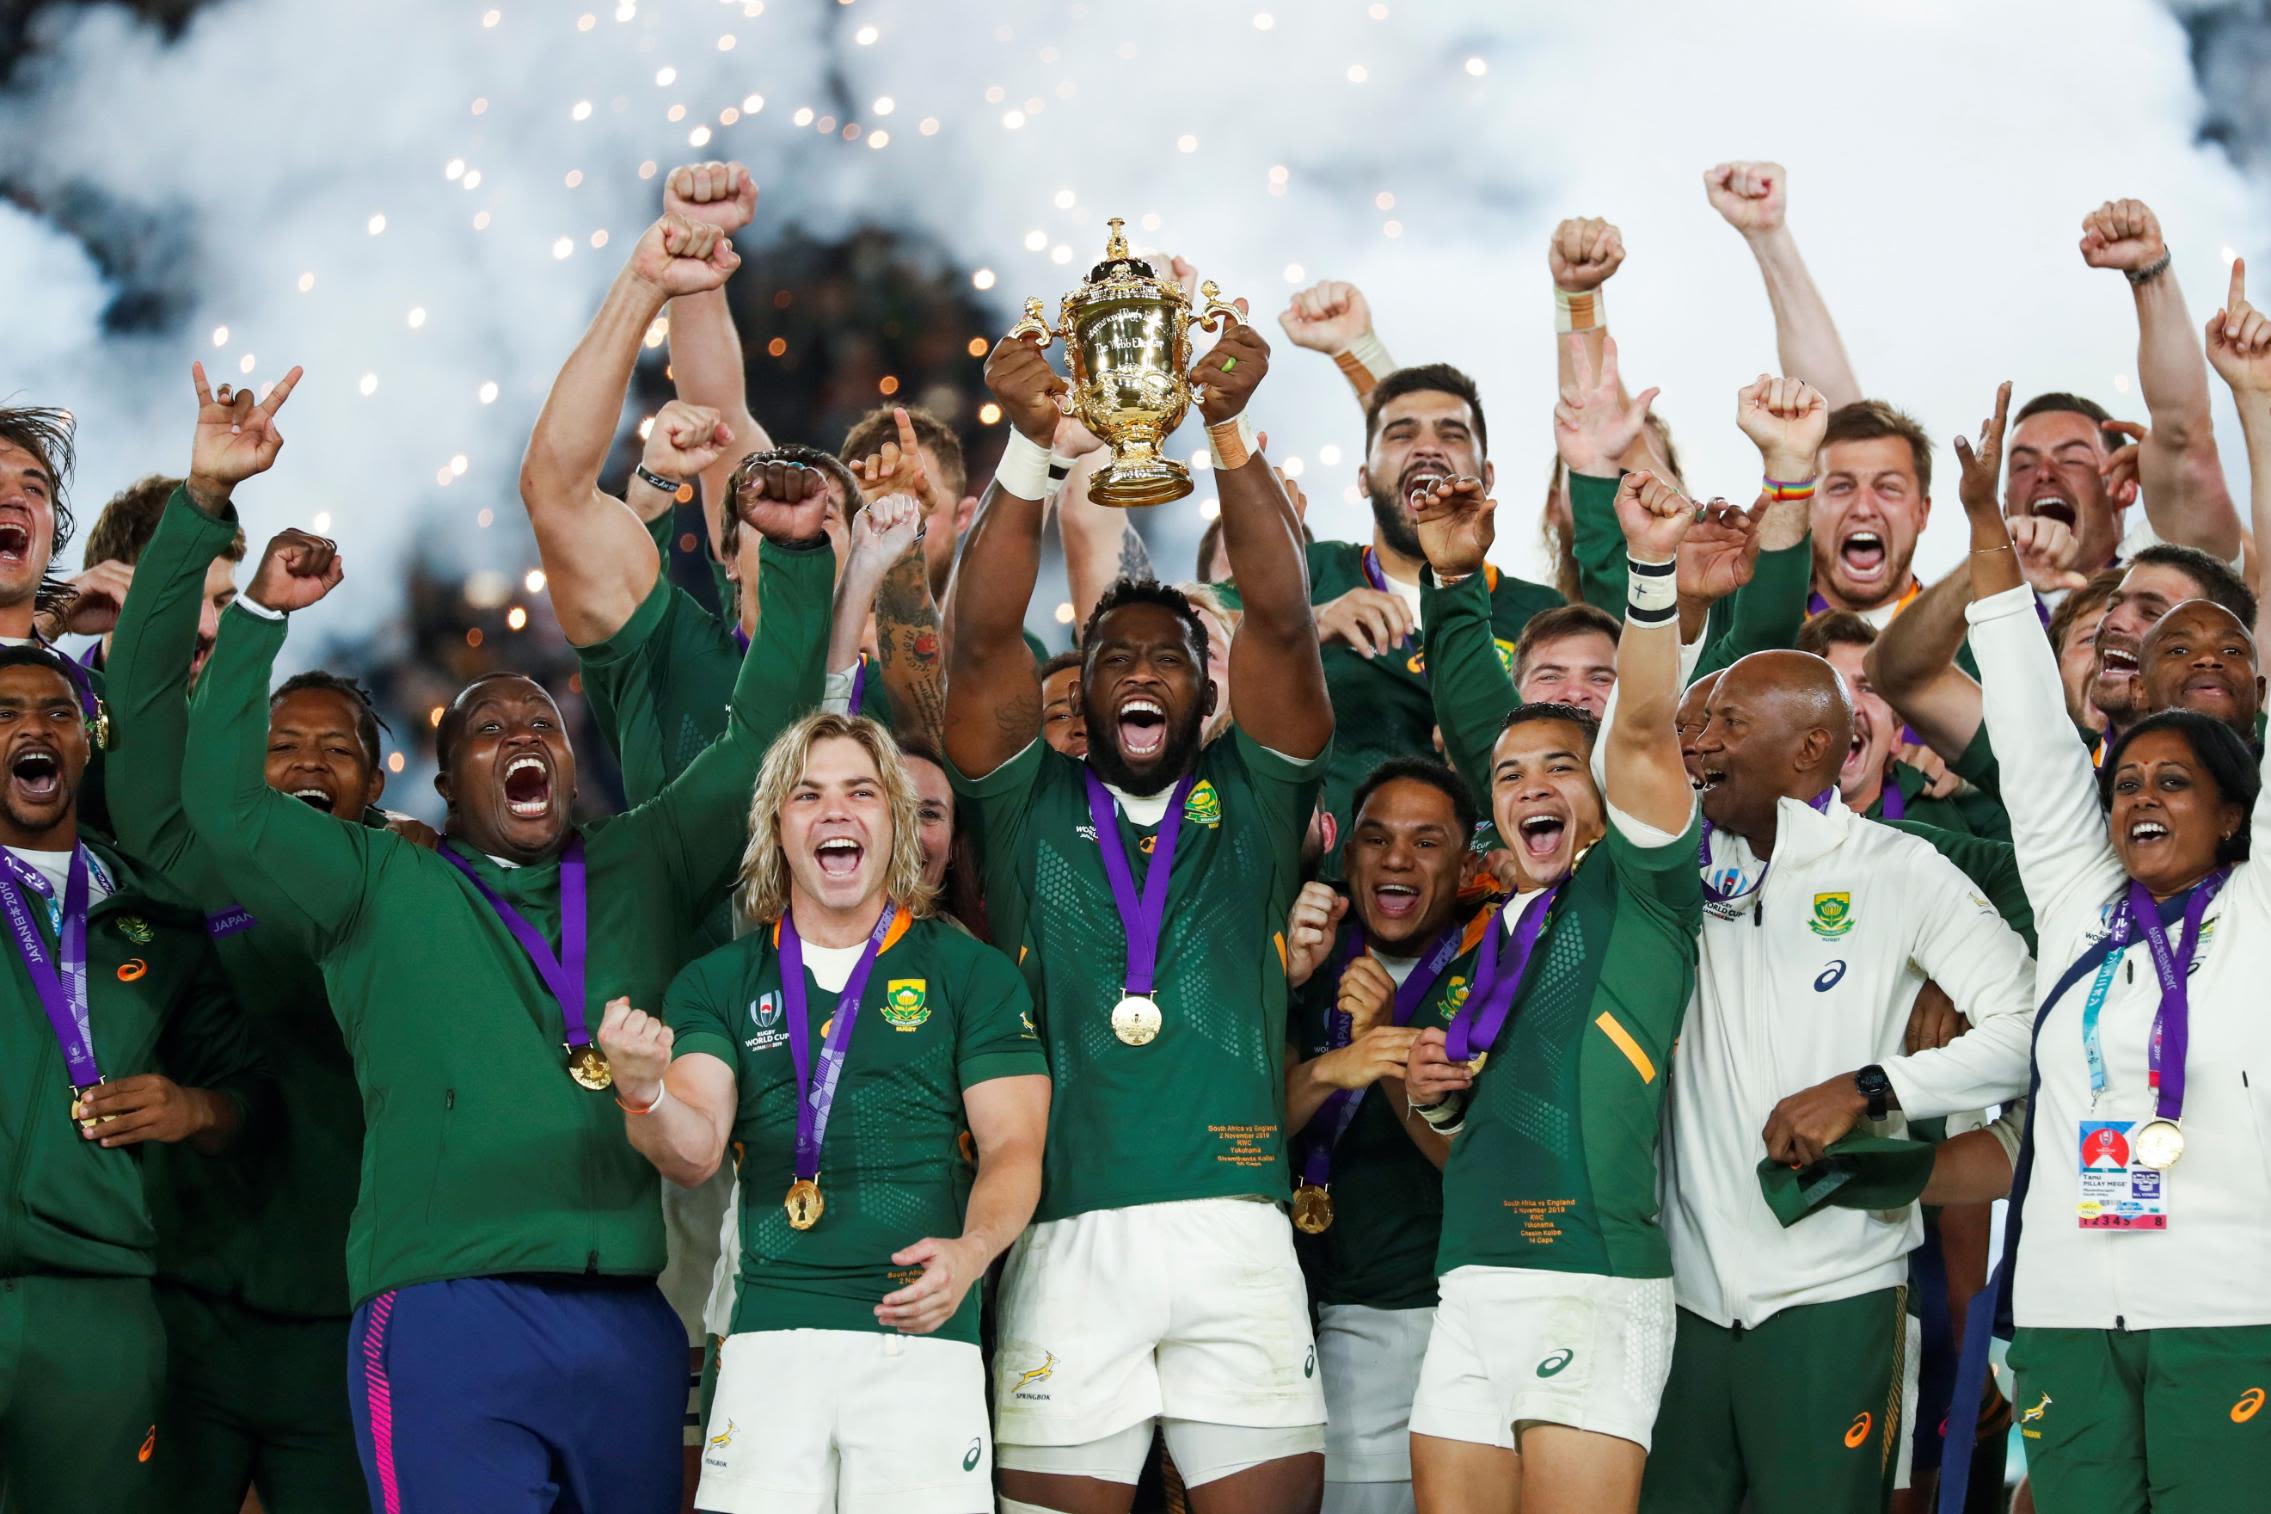 Videos  Rugby World Cup 2023